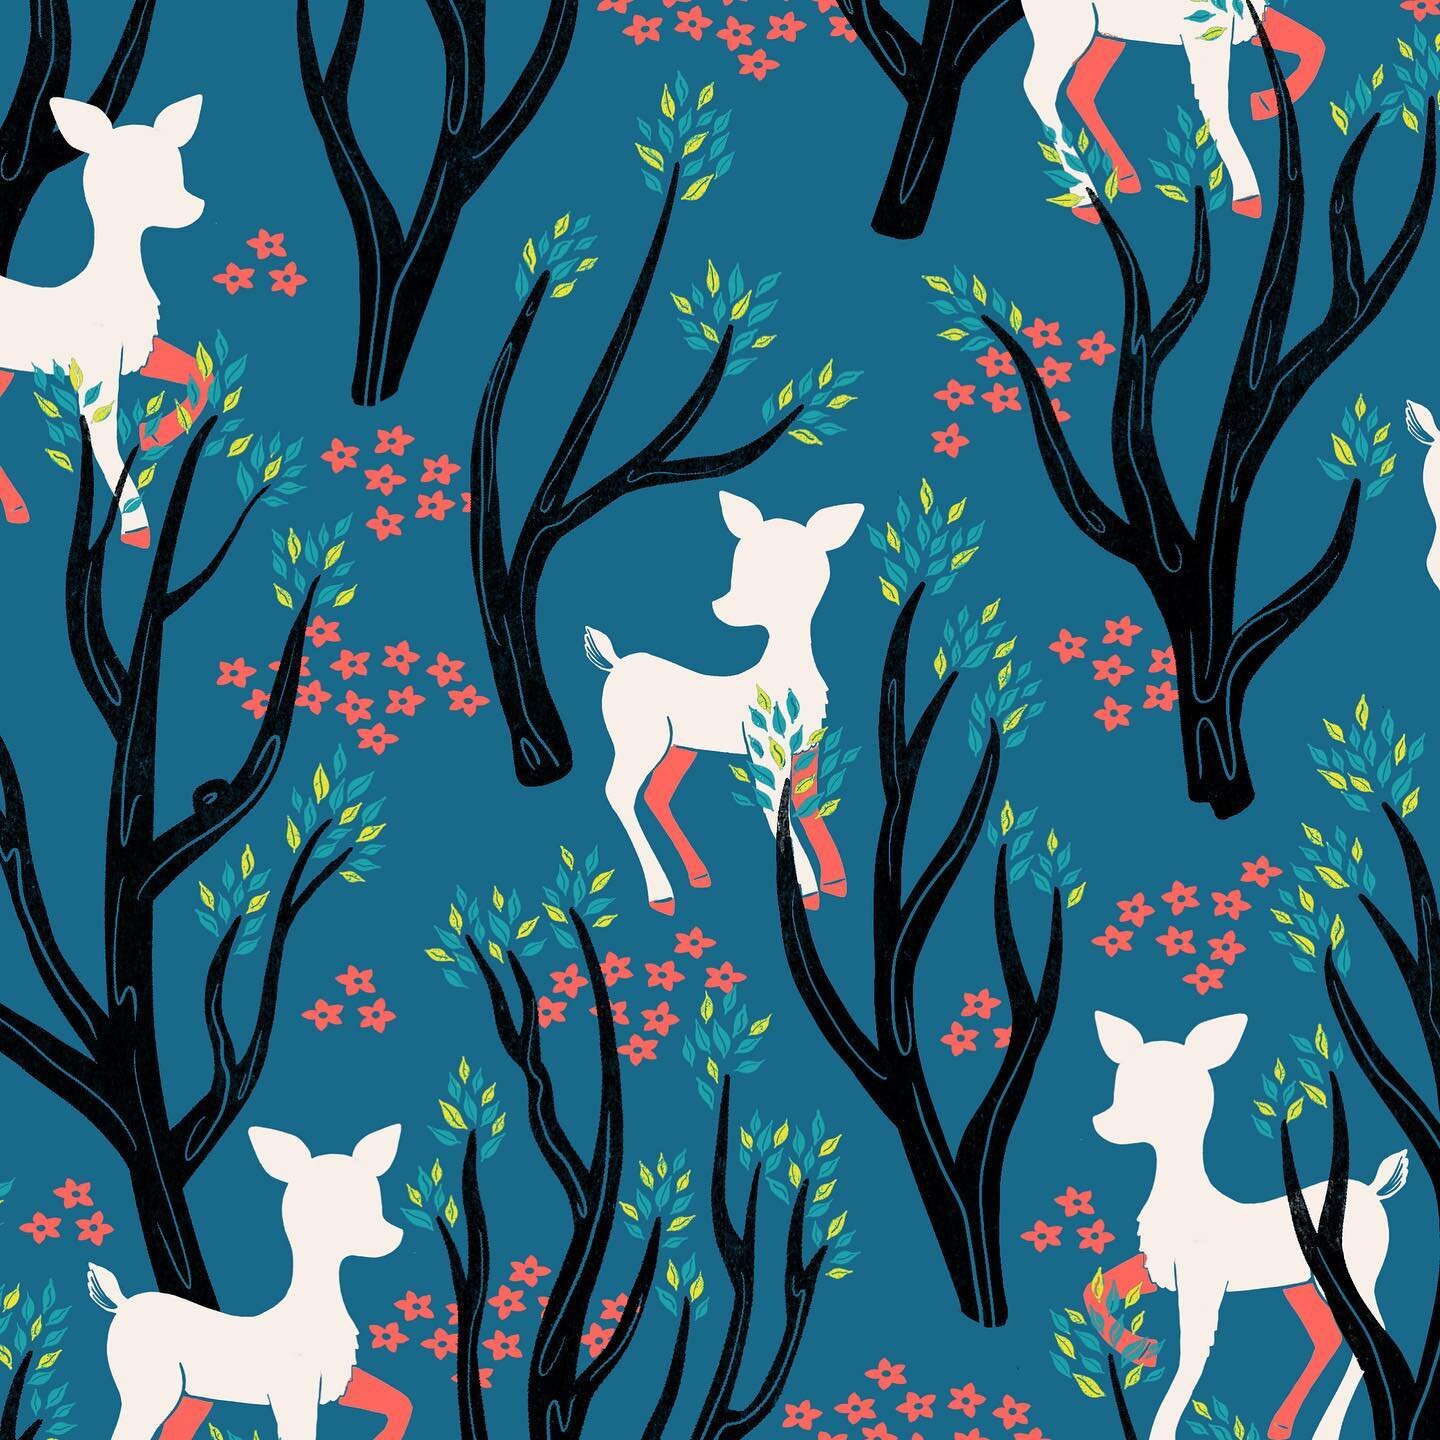 Coming soon to Spoonflower! Seriously, I just have to hit some buttons 😂 #fabricfriday